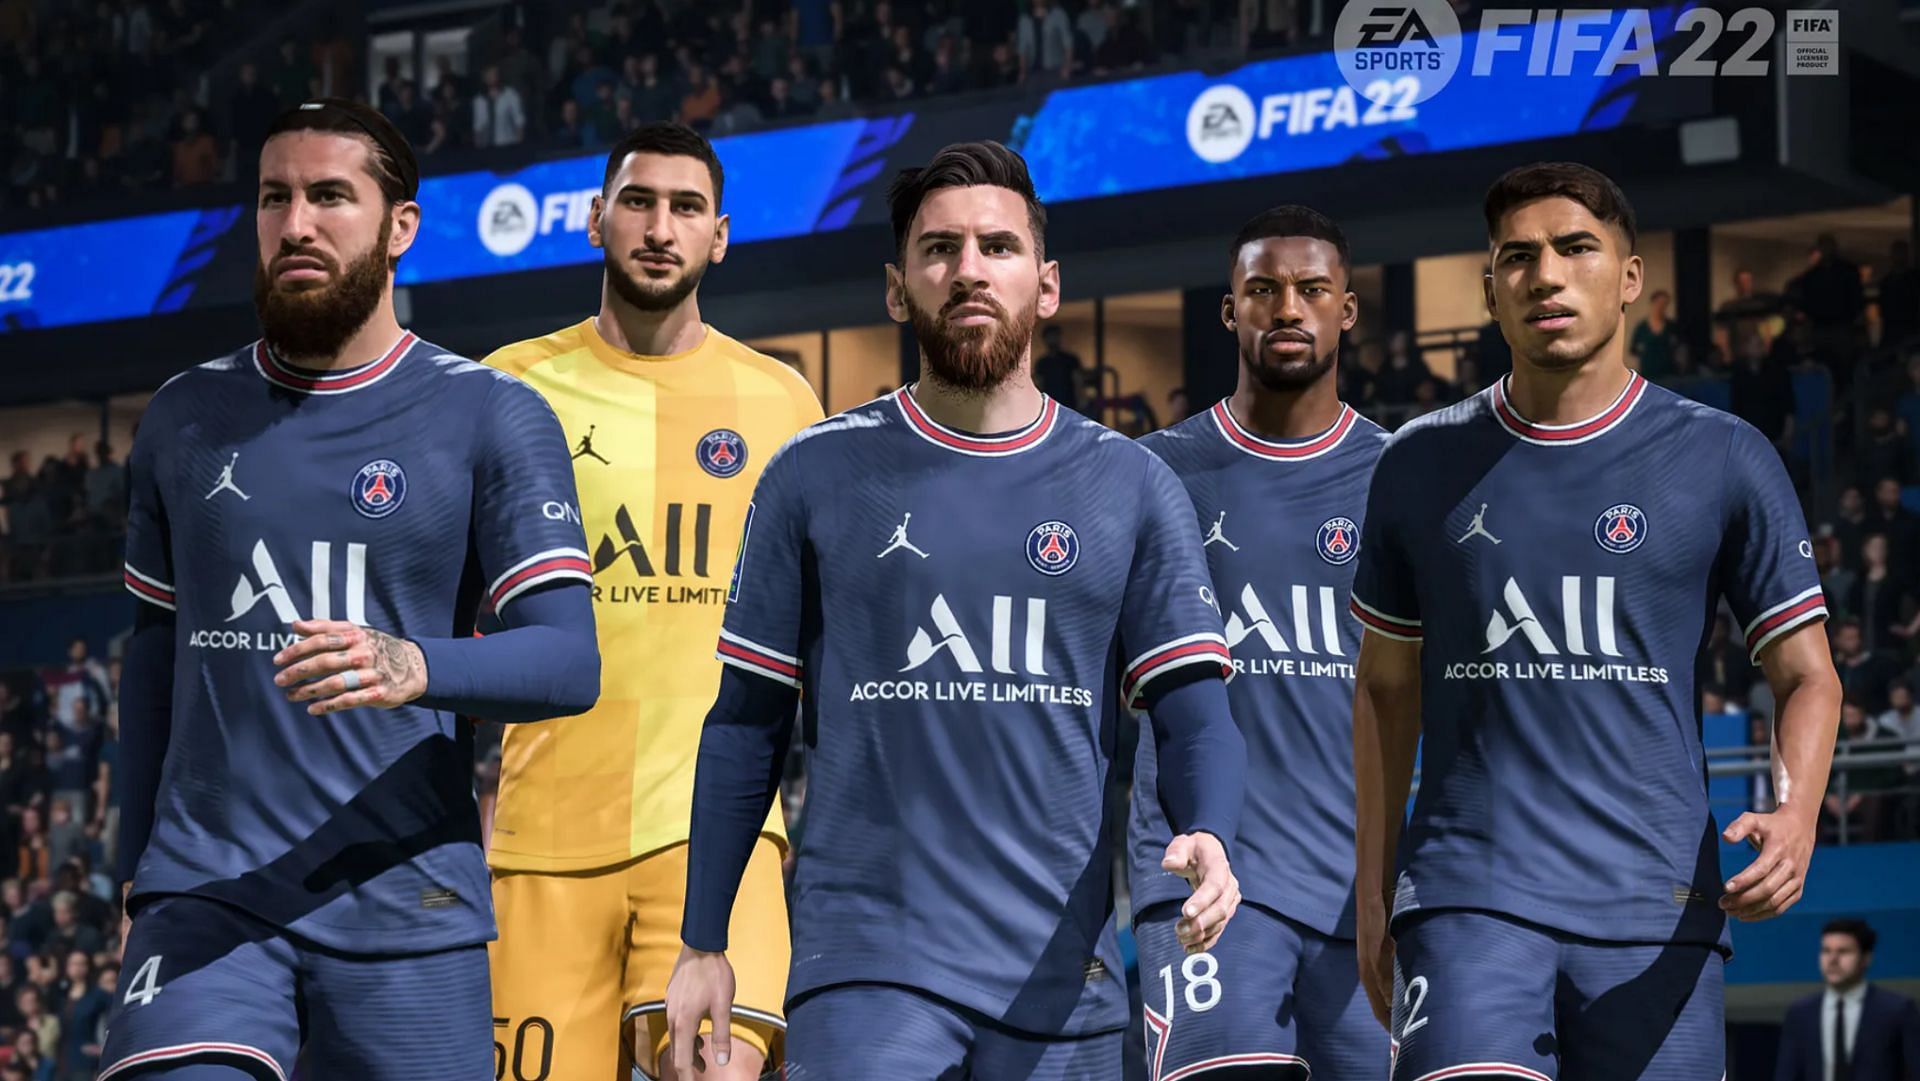 The PSG squad will once again be very strong this year (Image via EA Sports)